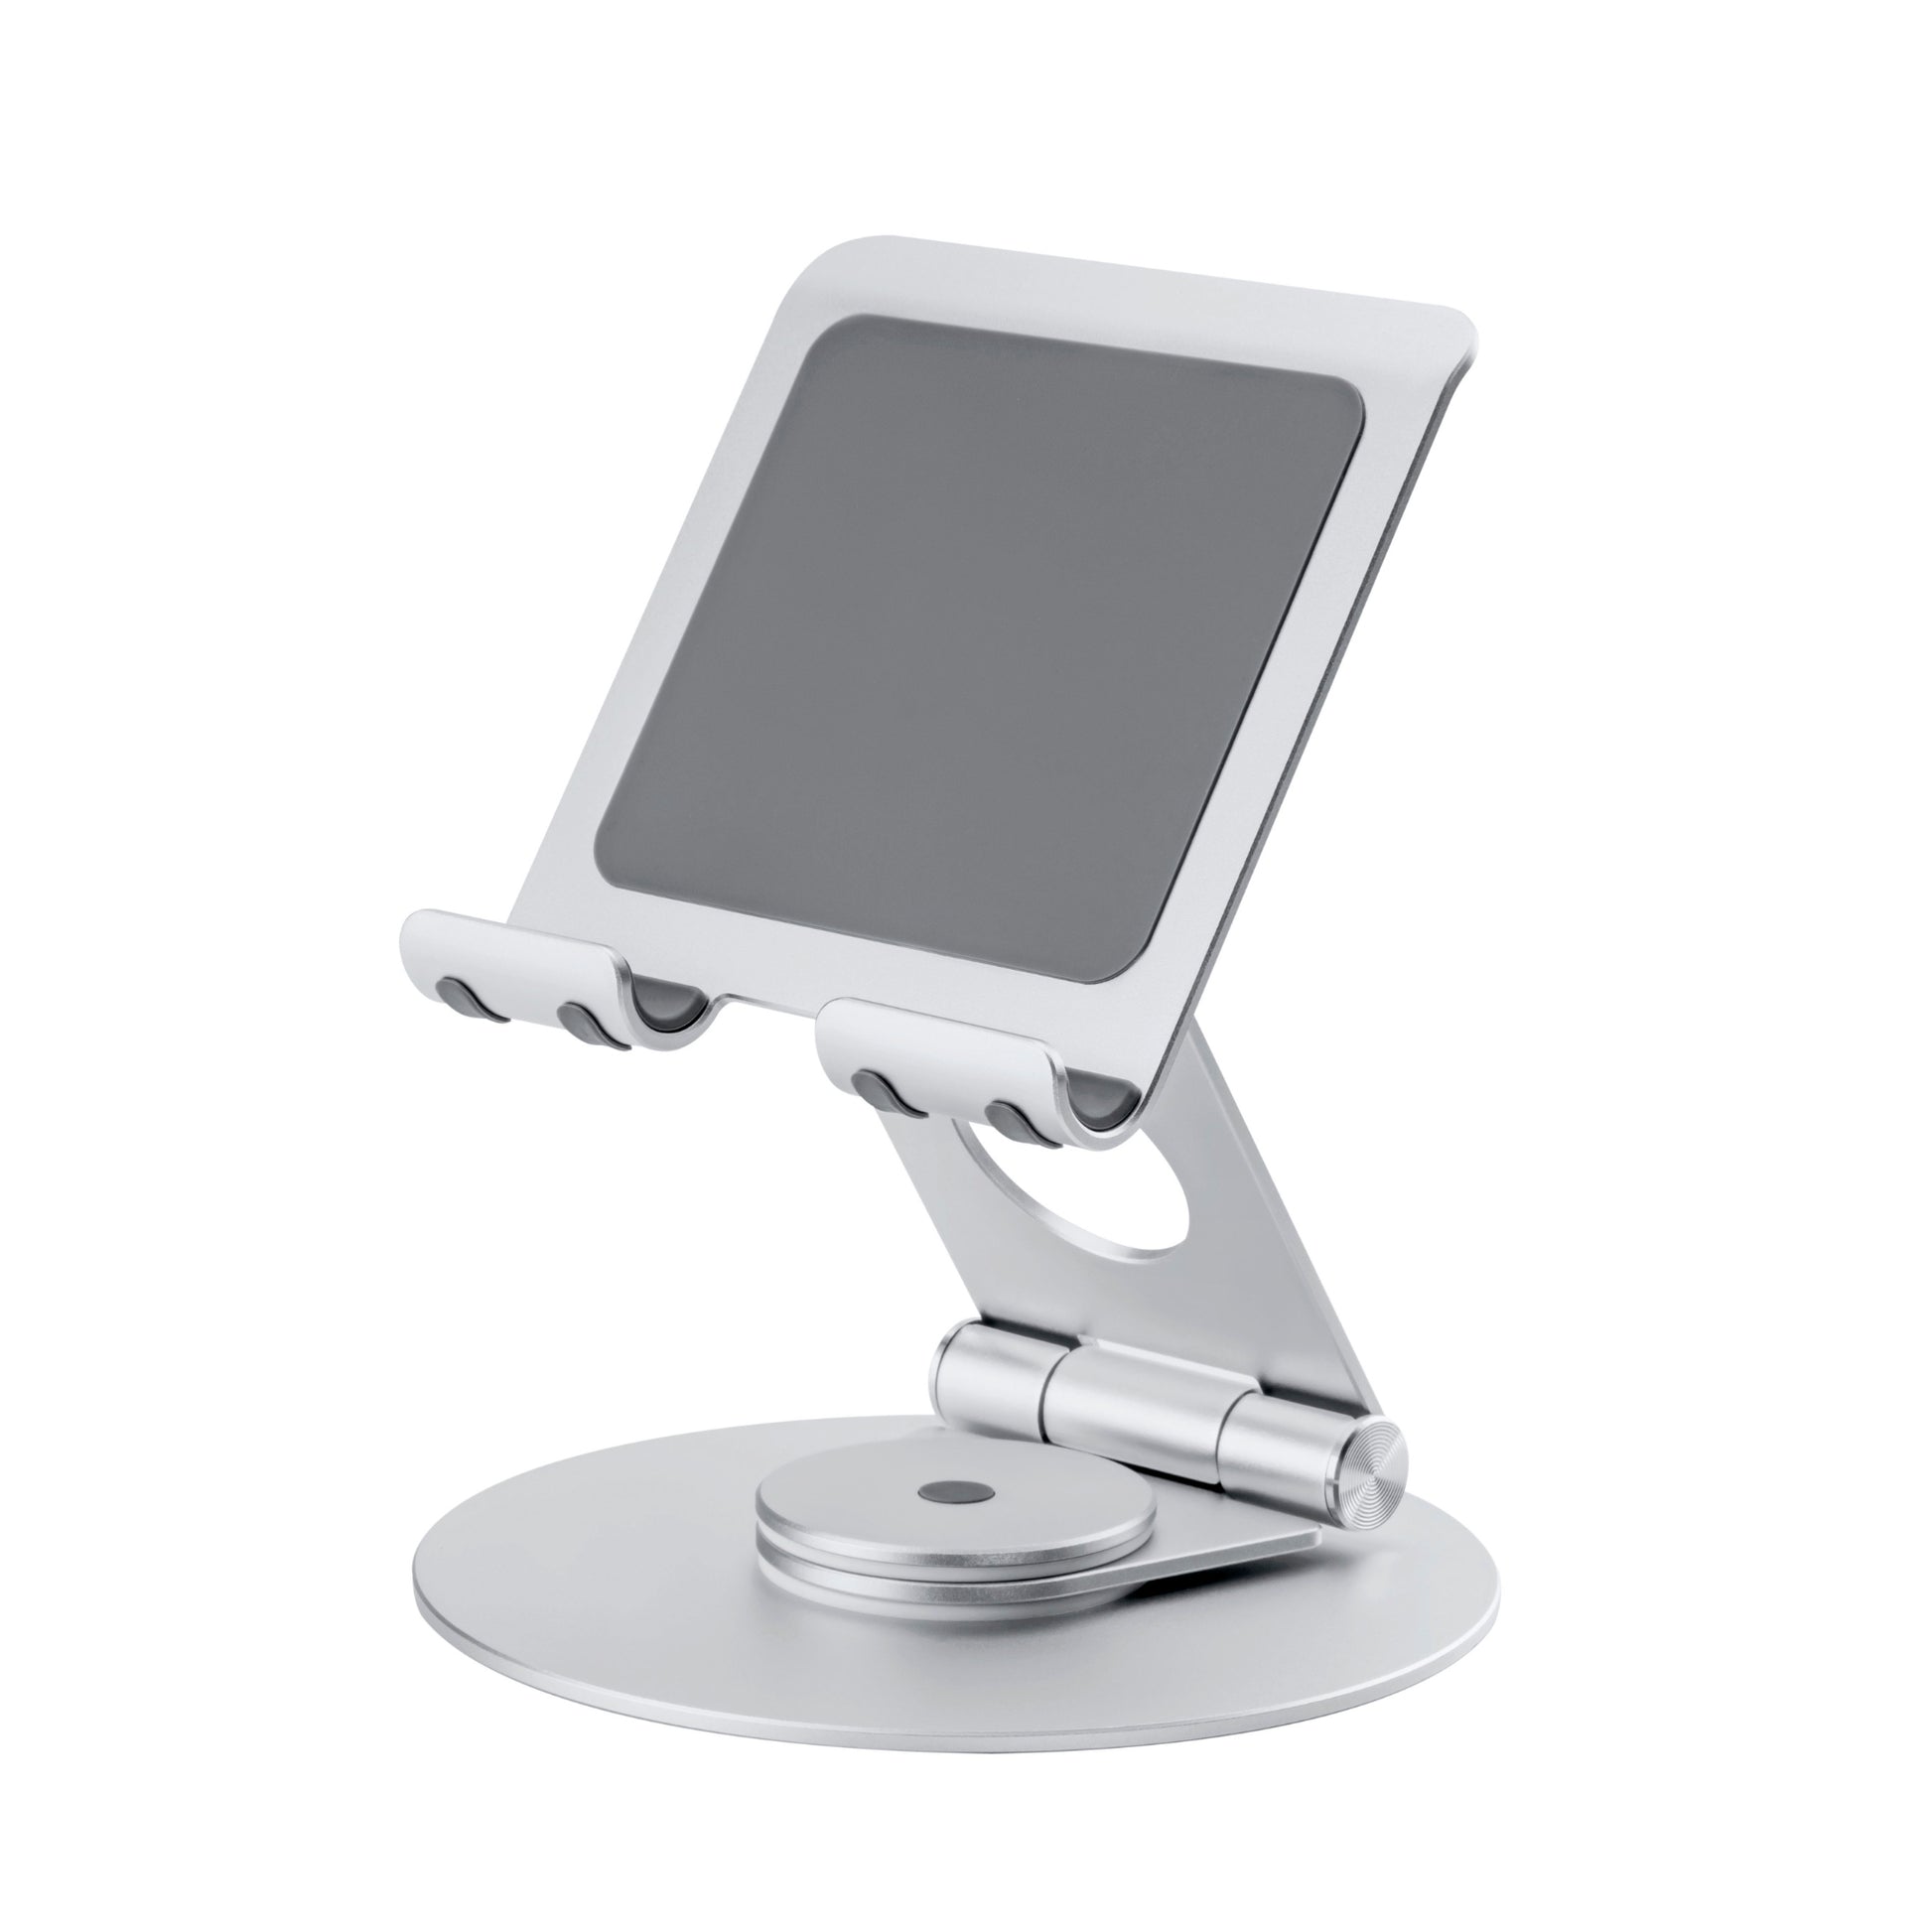 Front side of the tablet stand